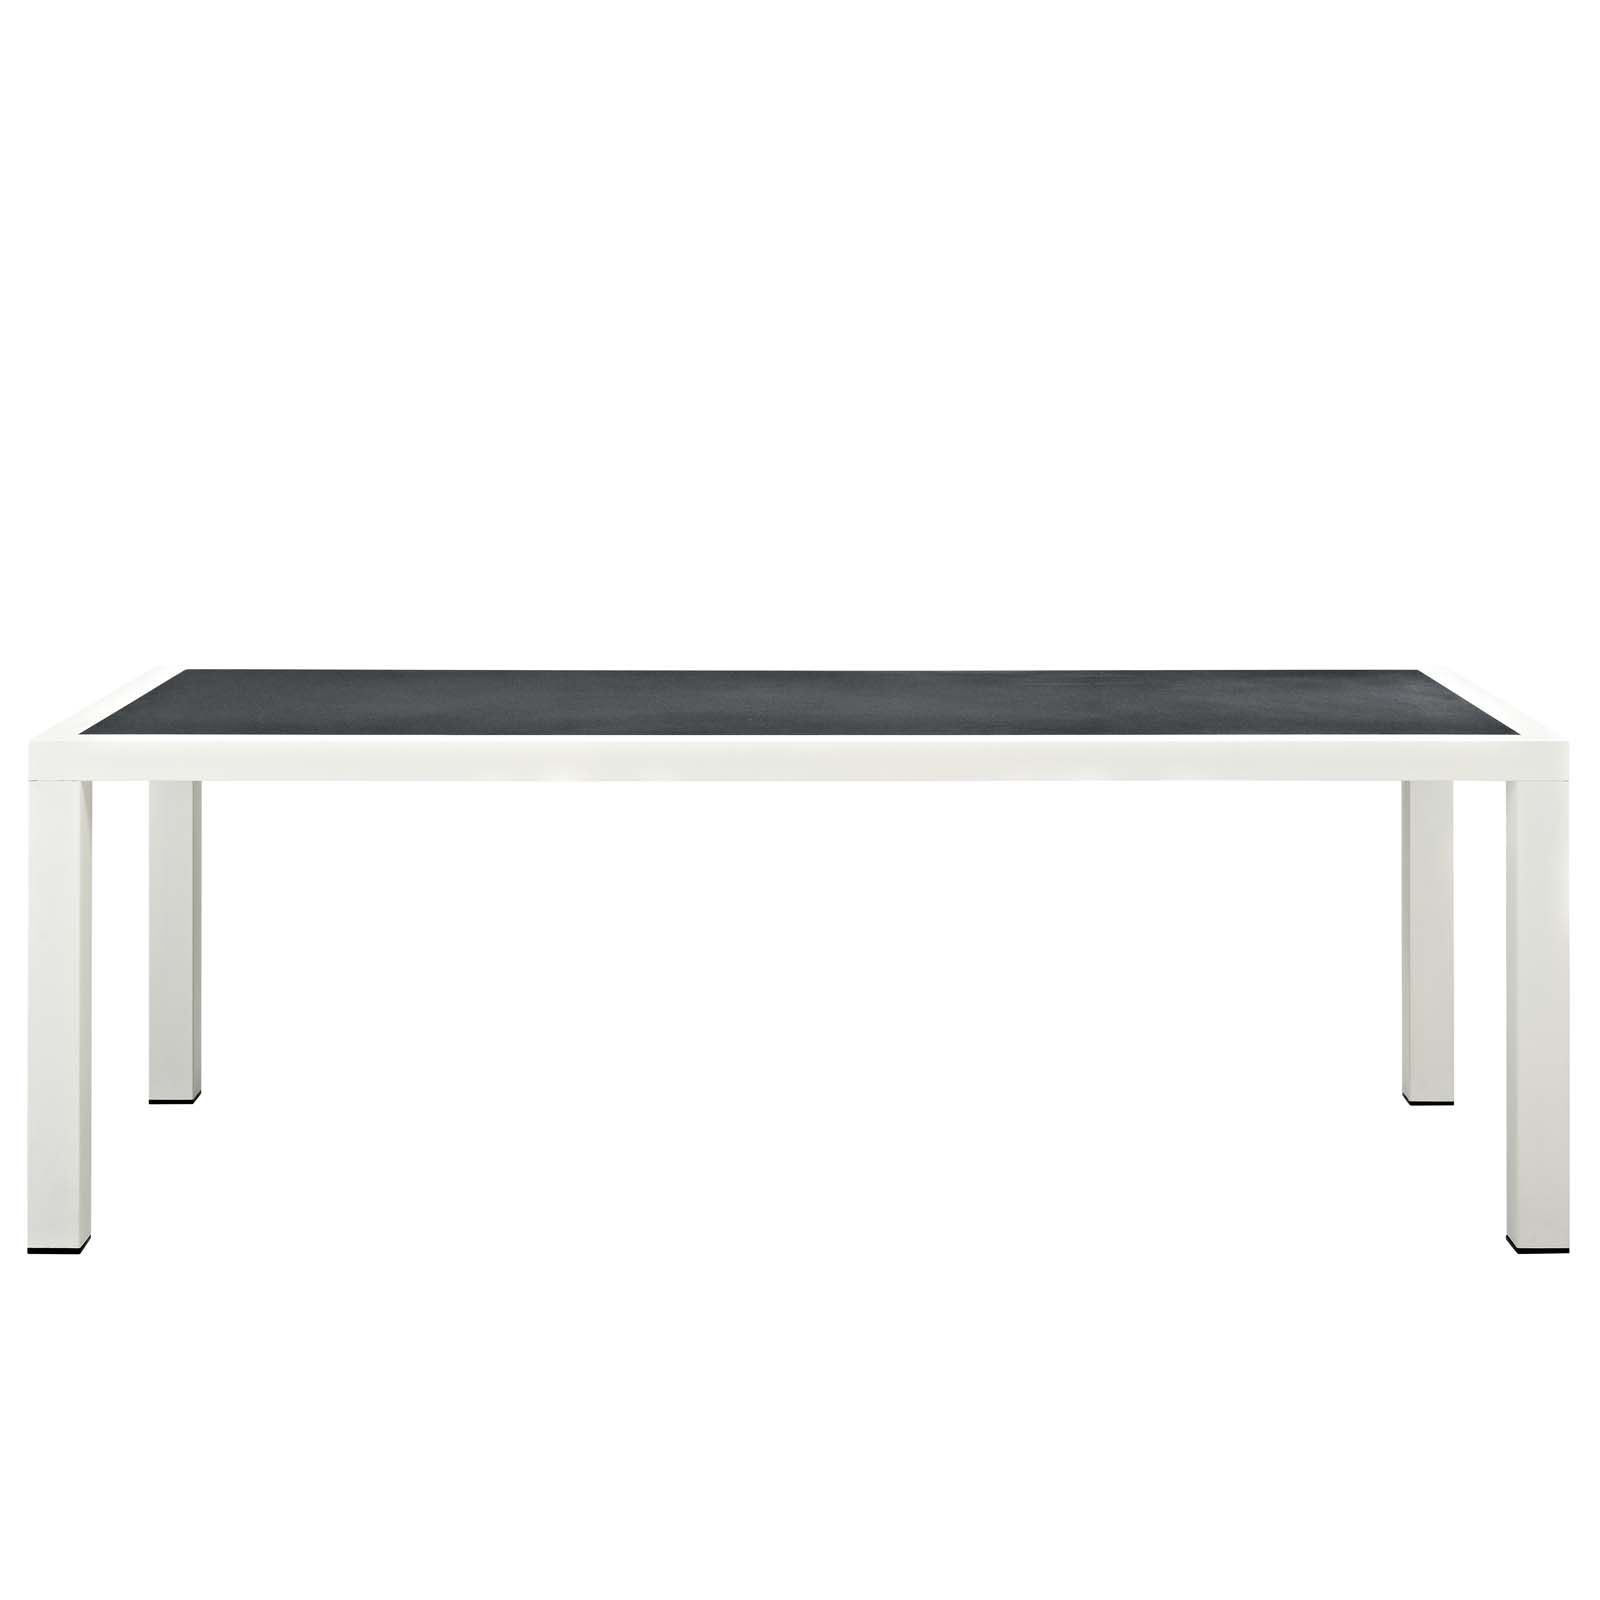 Modern Contemporary Urban Design Outdoor Patio Balcony Garden Furniture Lounge Dining Table, Aluminum Metal Steel, White - image 3 of 5